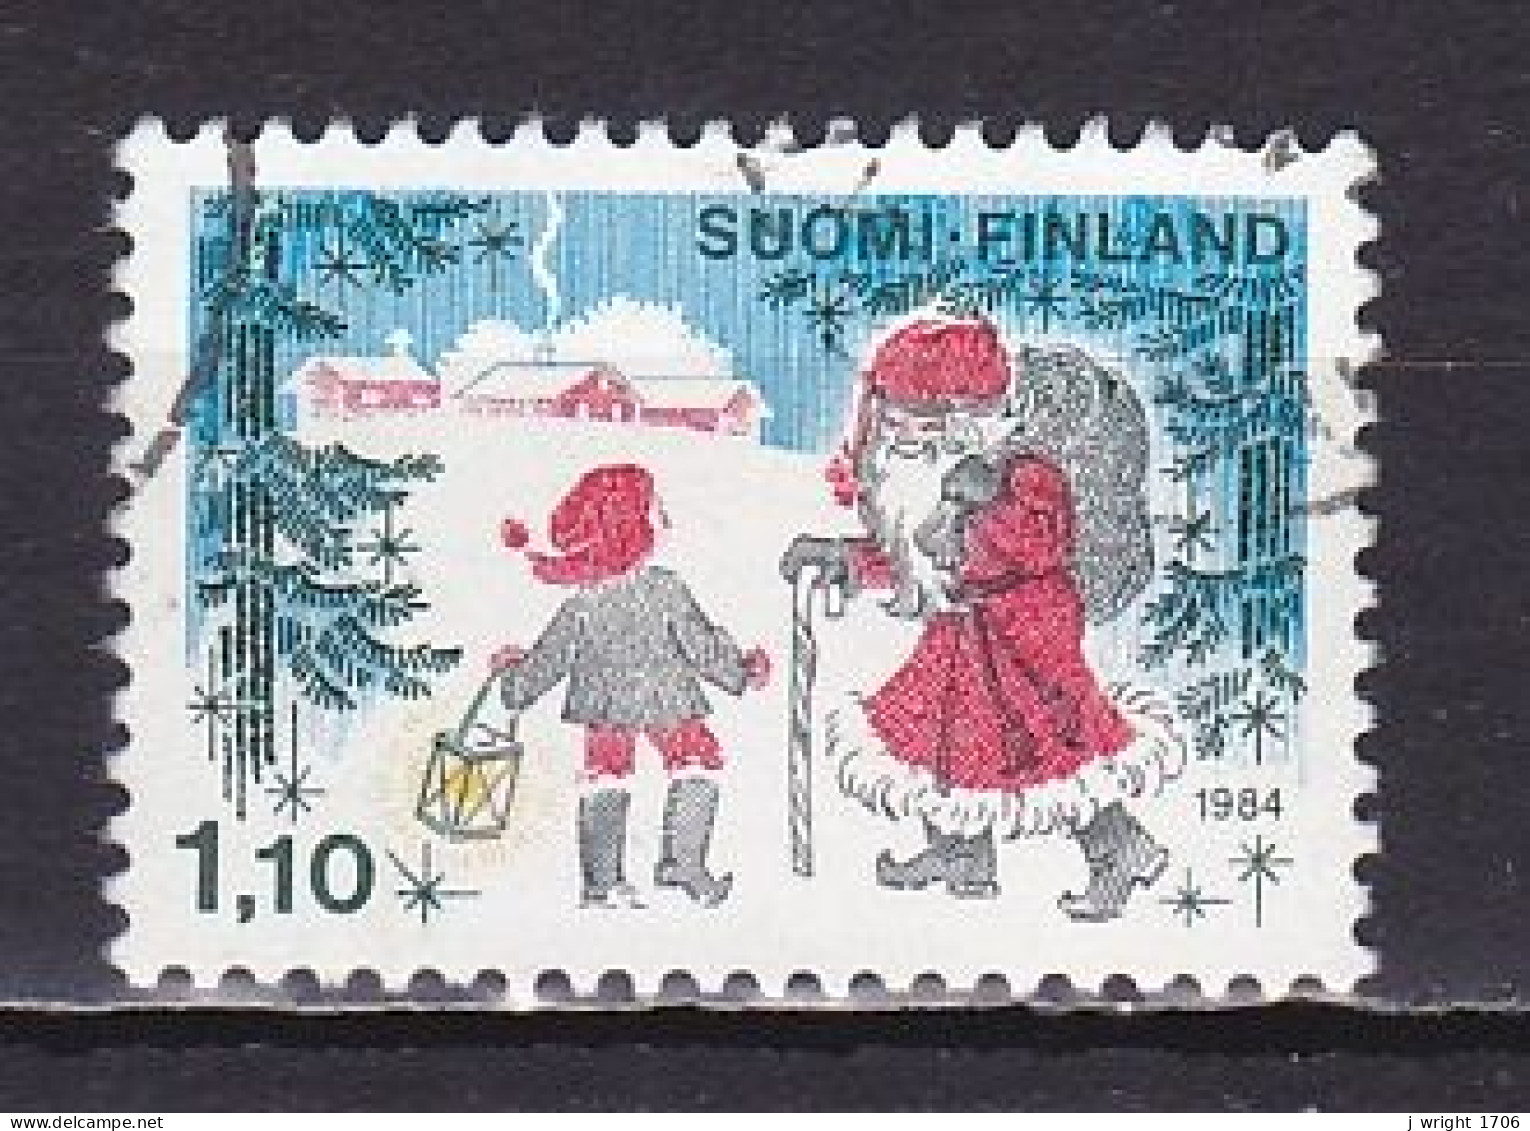 Finland, 1984, Christmas, 1.10mk, USED - Used Stamps